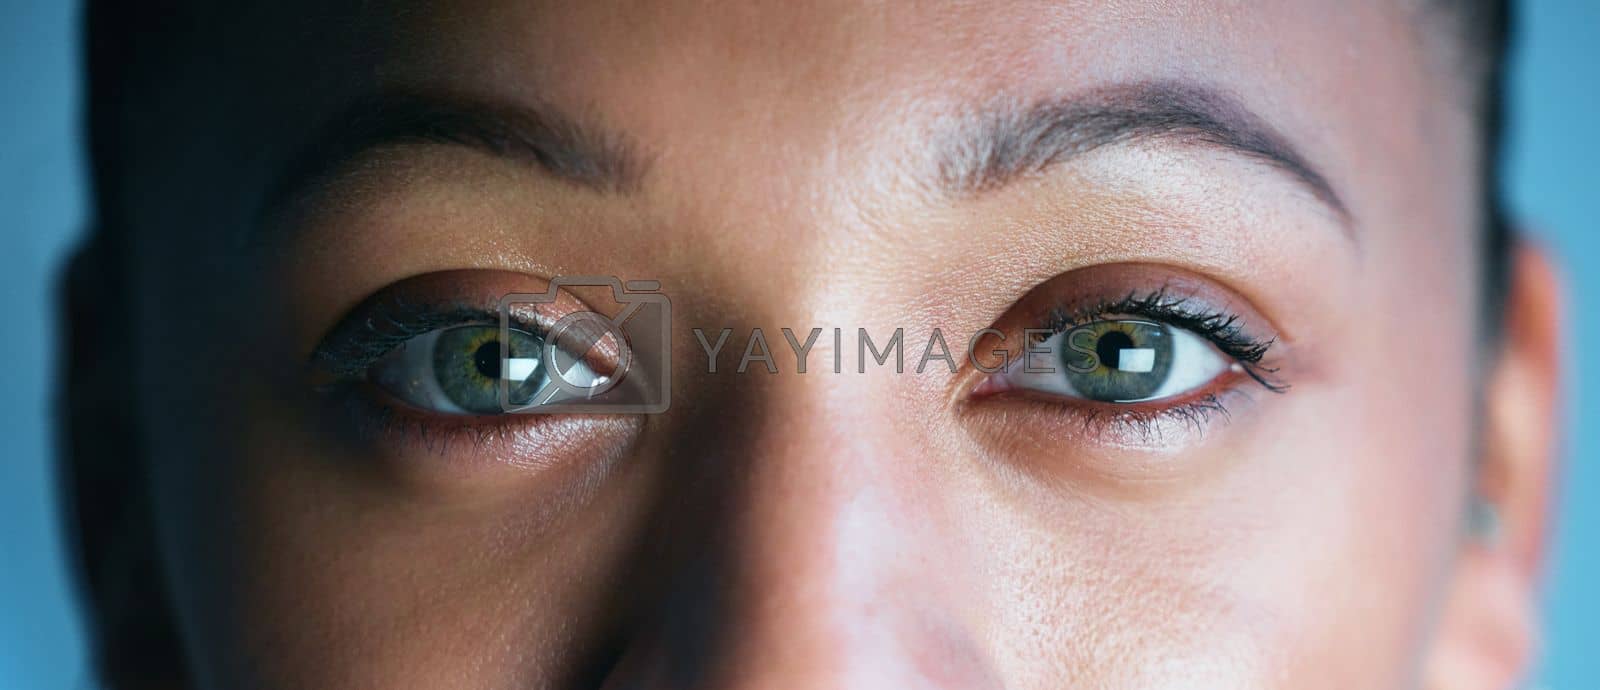 Royalty free image of Woman, face and eyes looking for biometrics, optics or vision in the future for scanning identity. Closeup of female eye in focus for scan, cyber security or facial recognition with optical iris by YuriArcurs